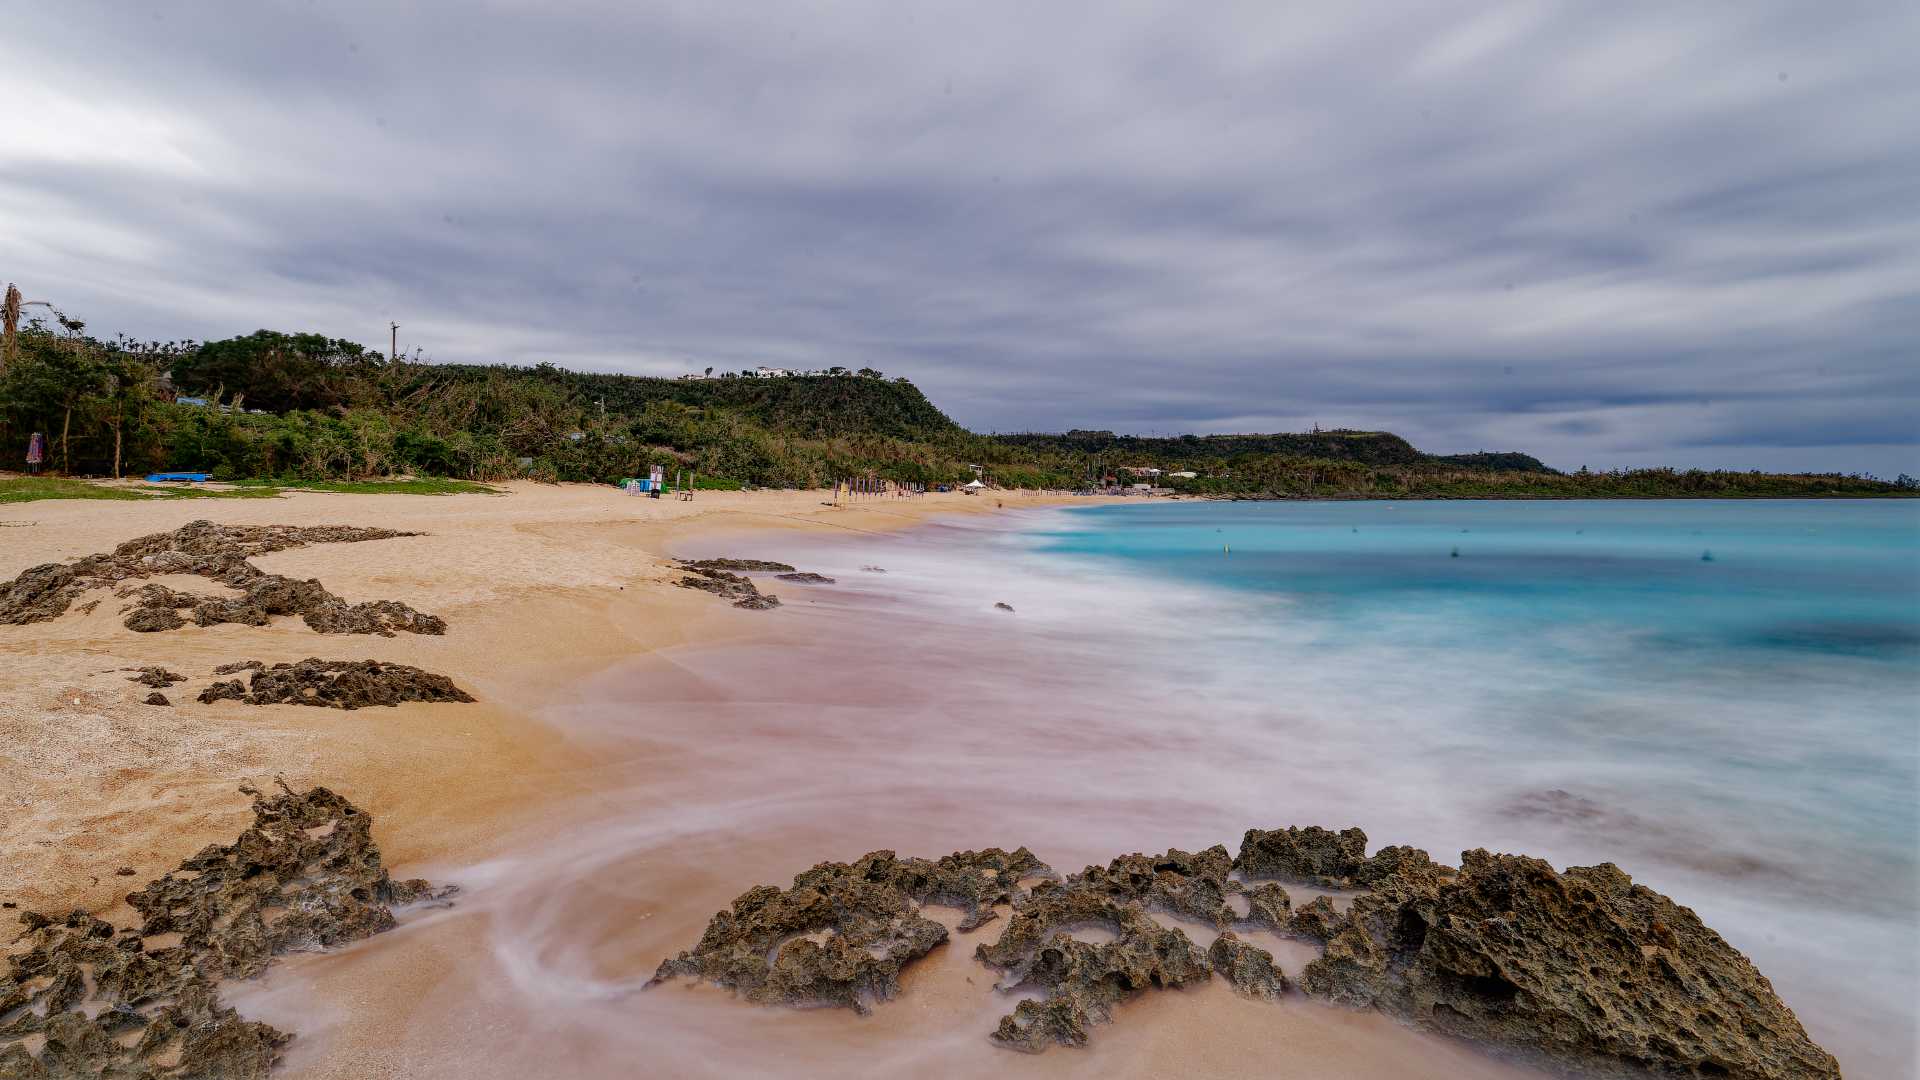 A long exposure of Kenting Baishawan Beach. The sand looks warm and golden, and the water is a vibrant, clear, azure blue. There are few people on the beach.